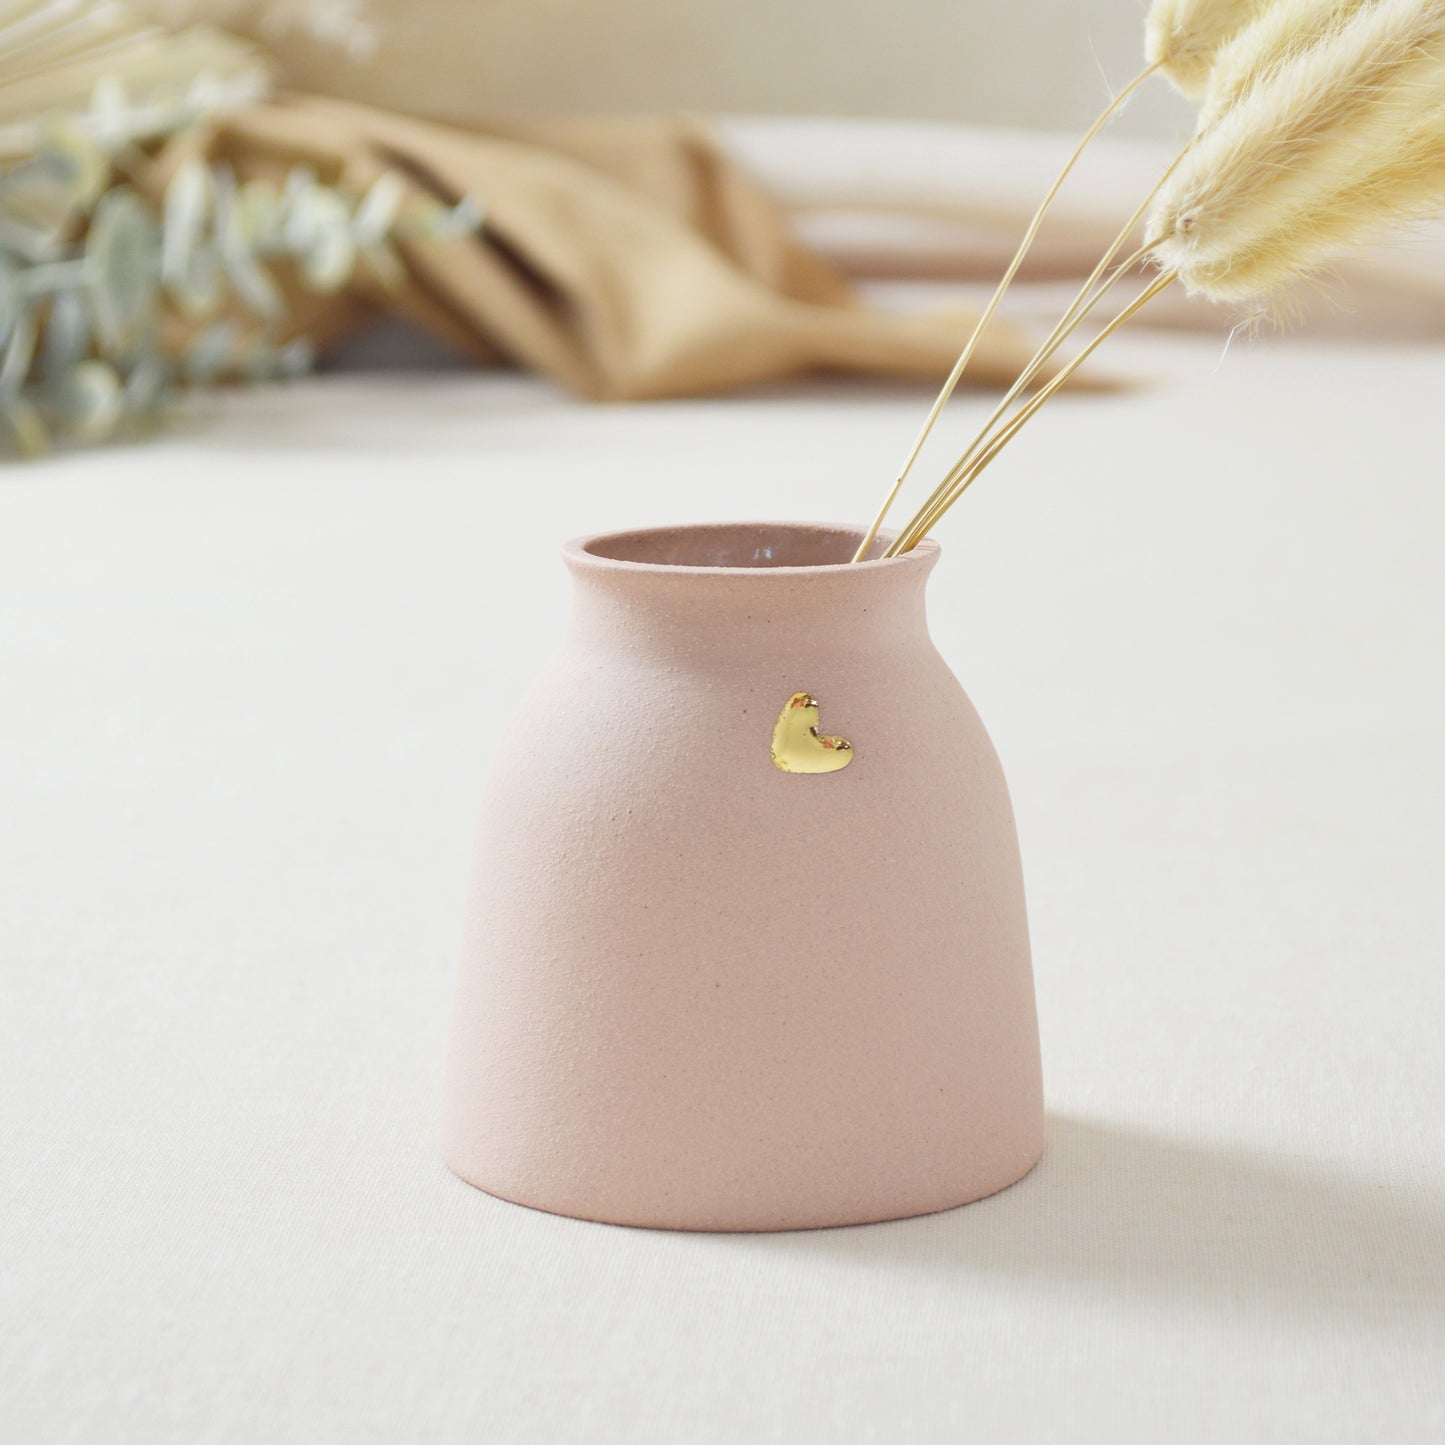 Small Pastel Pink Vase With A Gold Embossed Heart | Flower Vase | Small Vase | Stoneware Vase